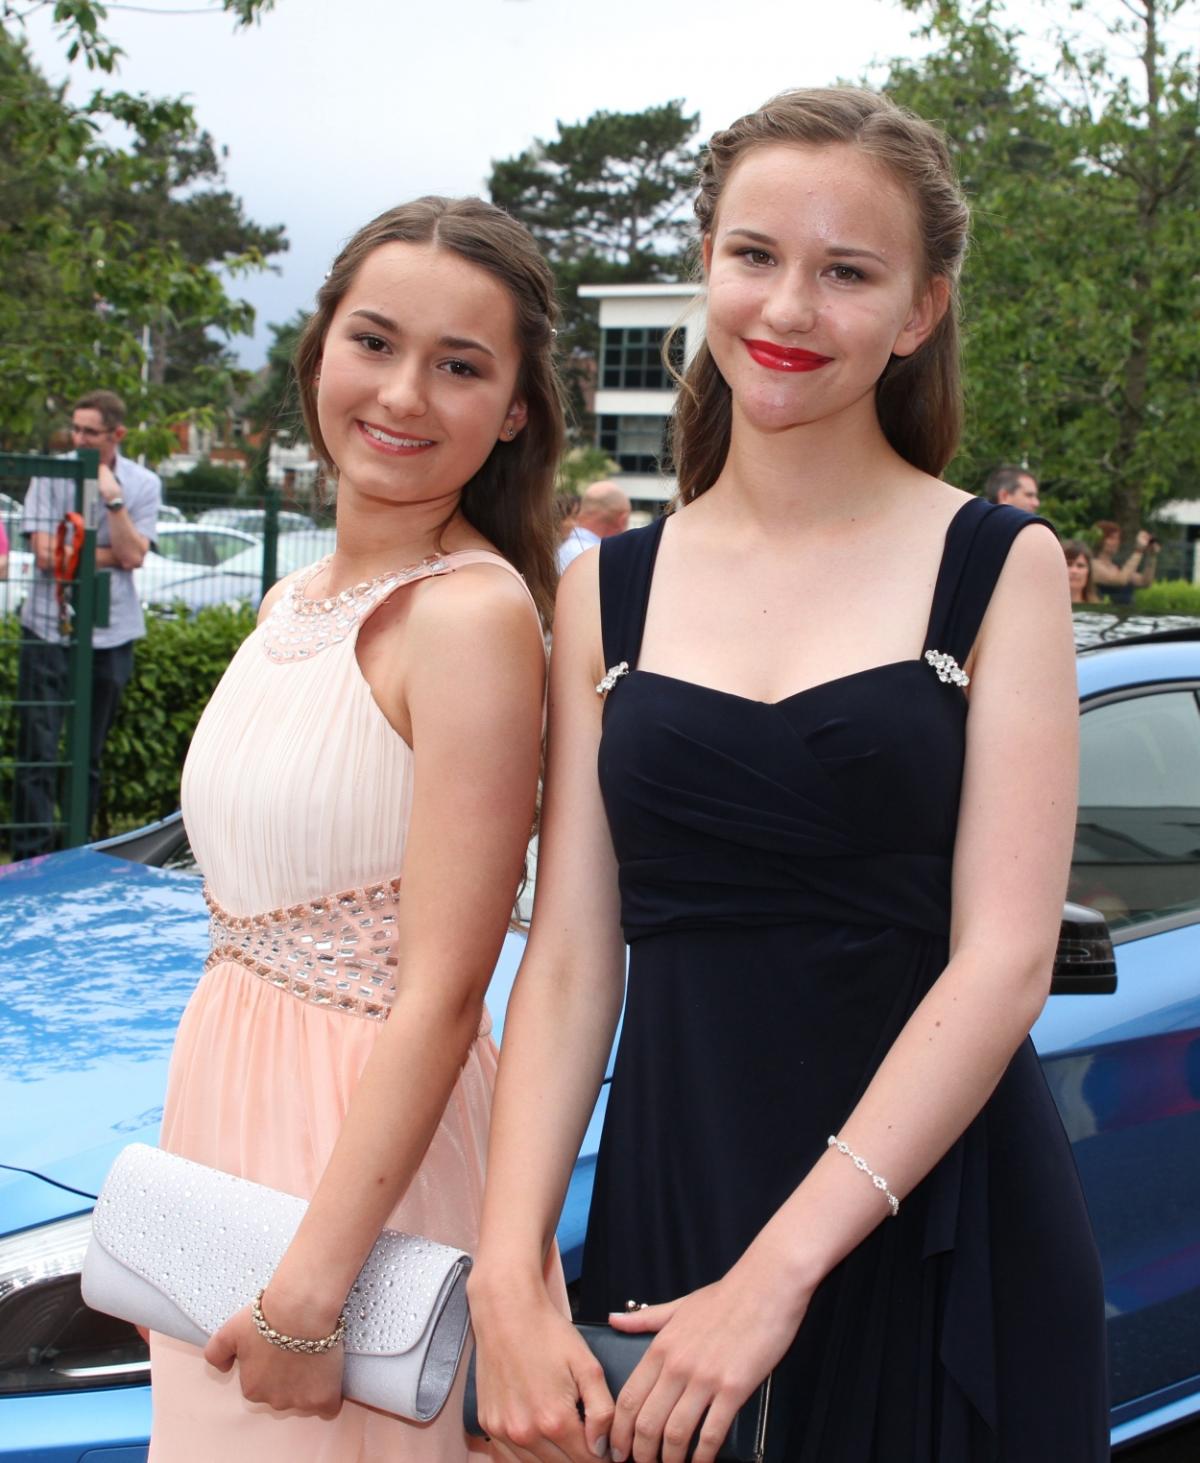 Ferndown Upper School Year 11 prom at AFC Bournemouth on June 26. Pictures by Hattie Miles